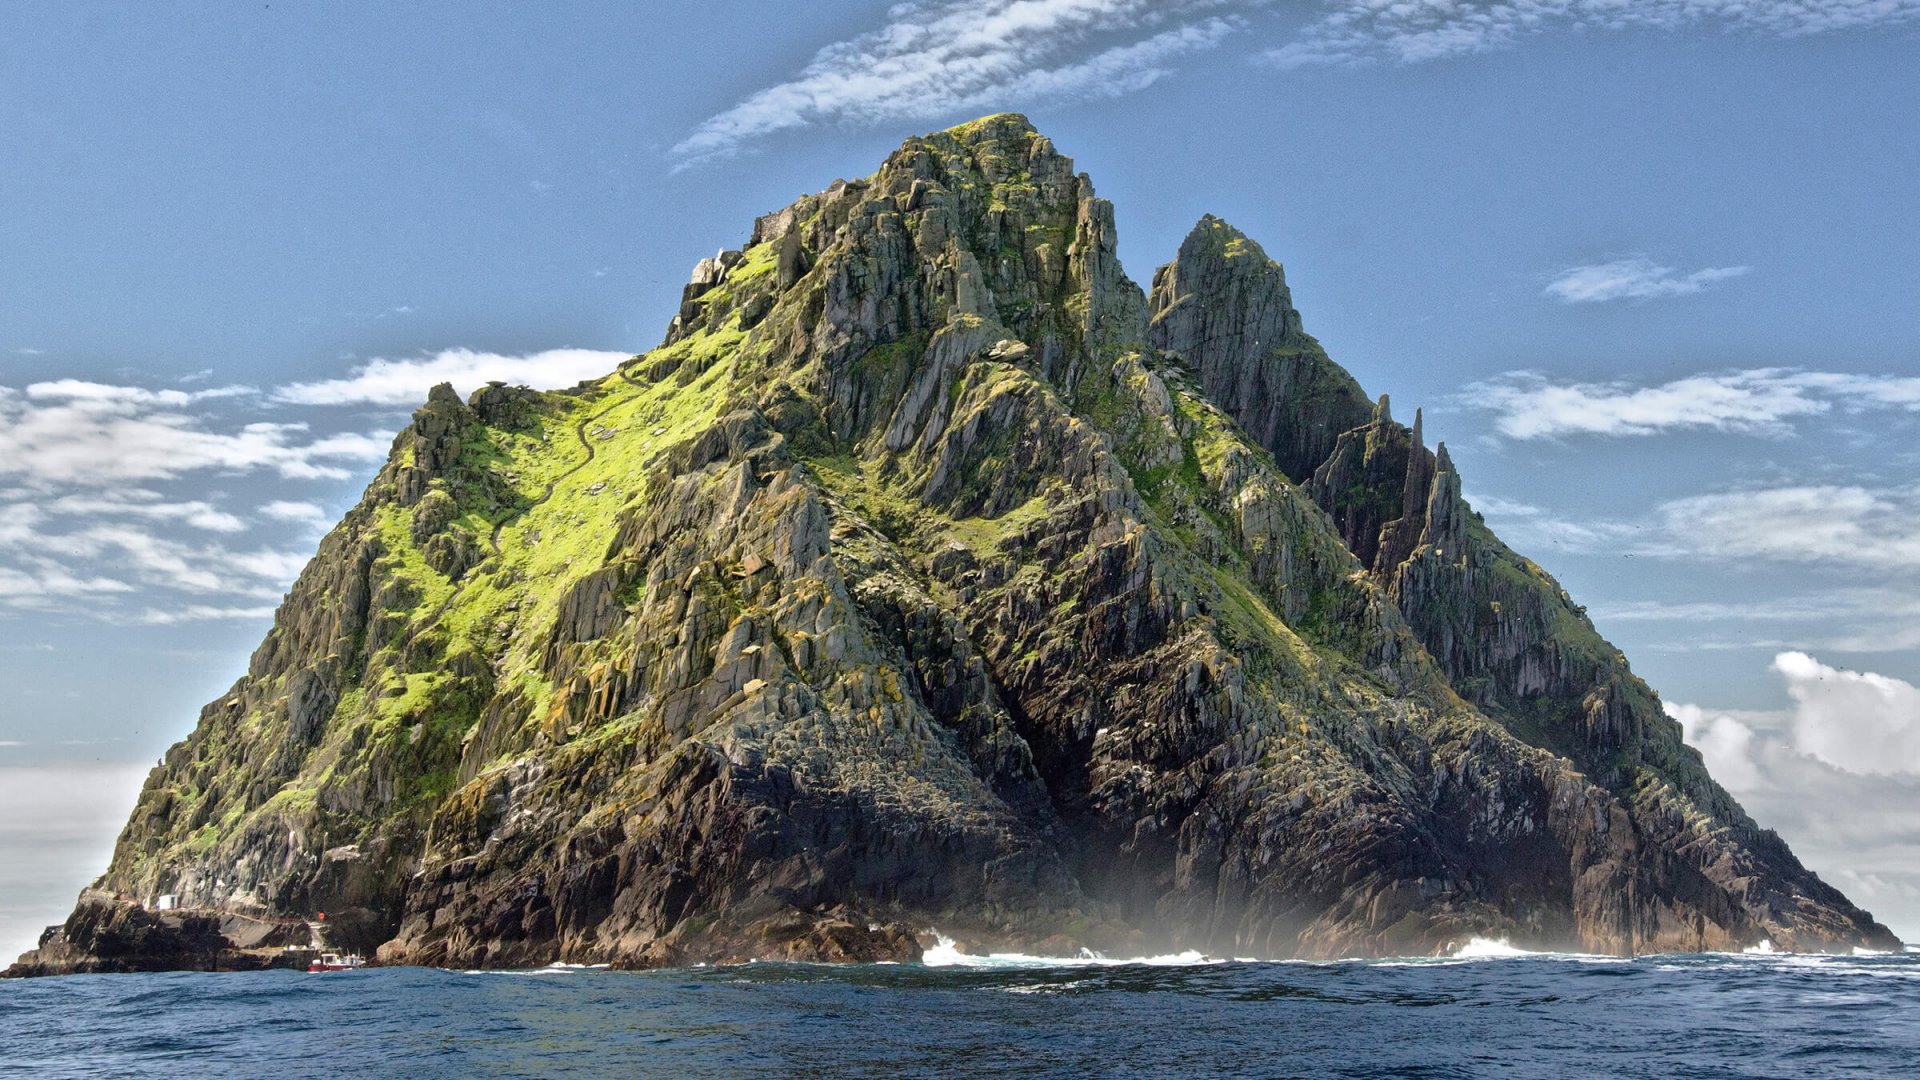 Skellig Michael Island - one of Ireland's most scenic places